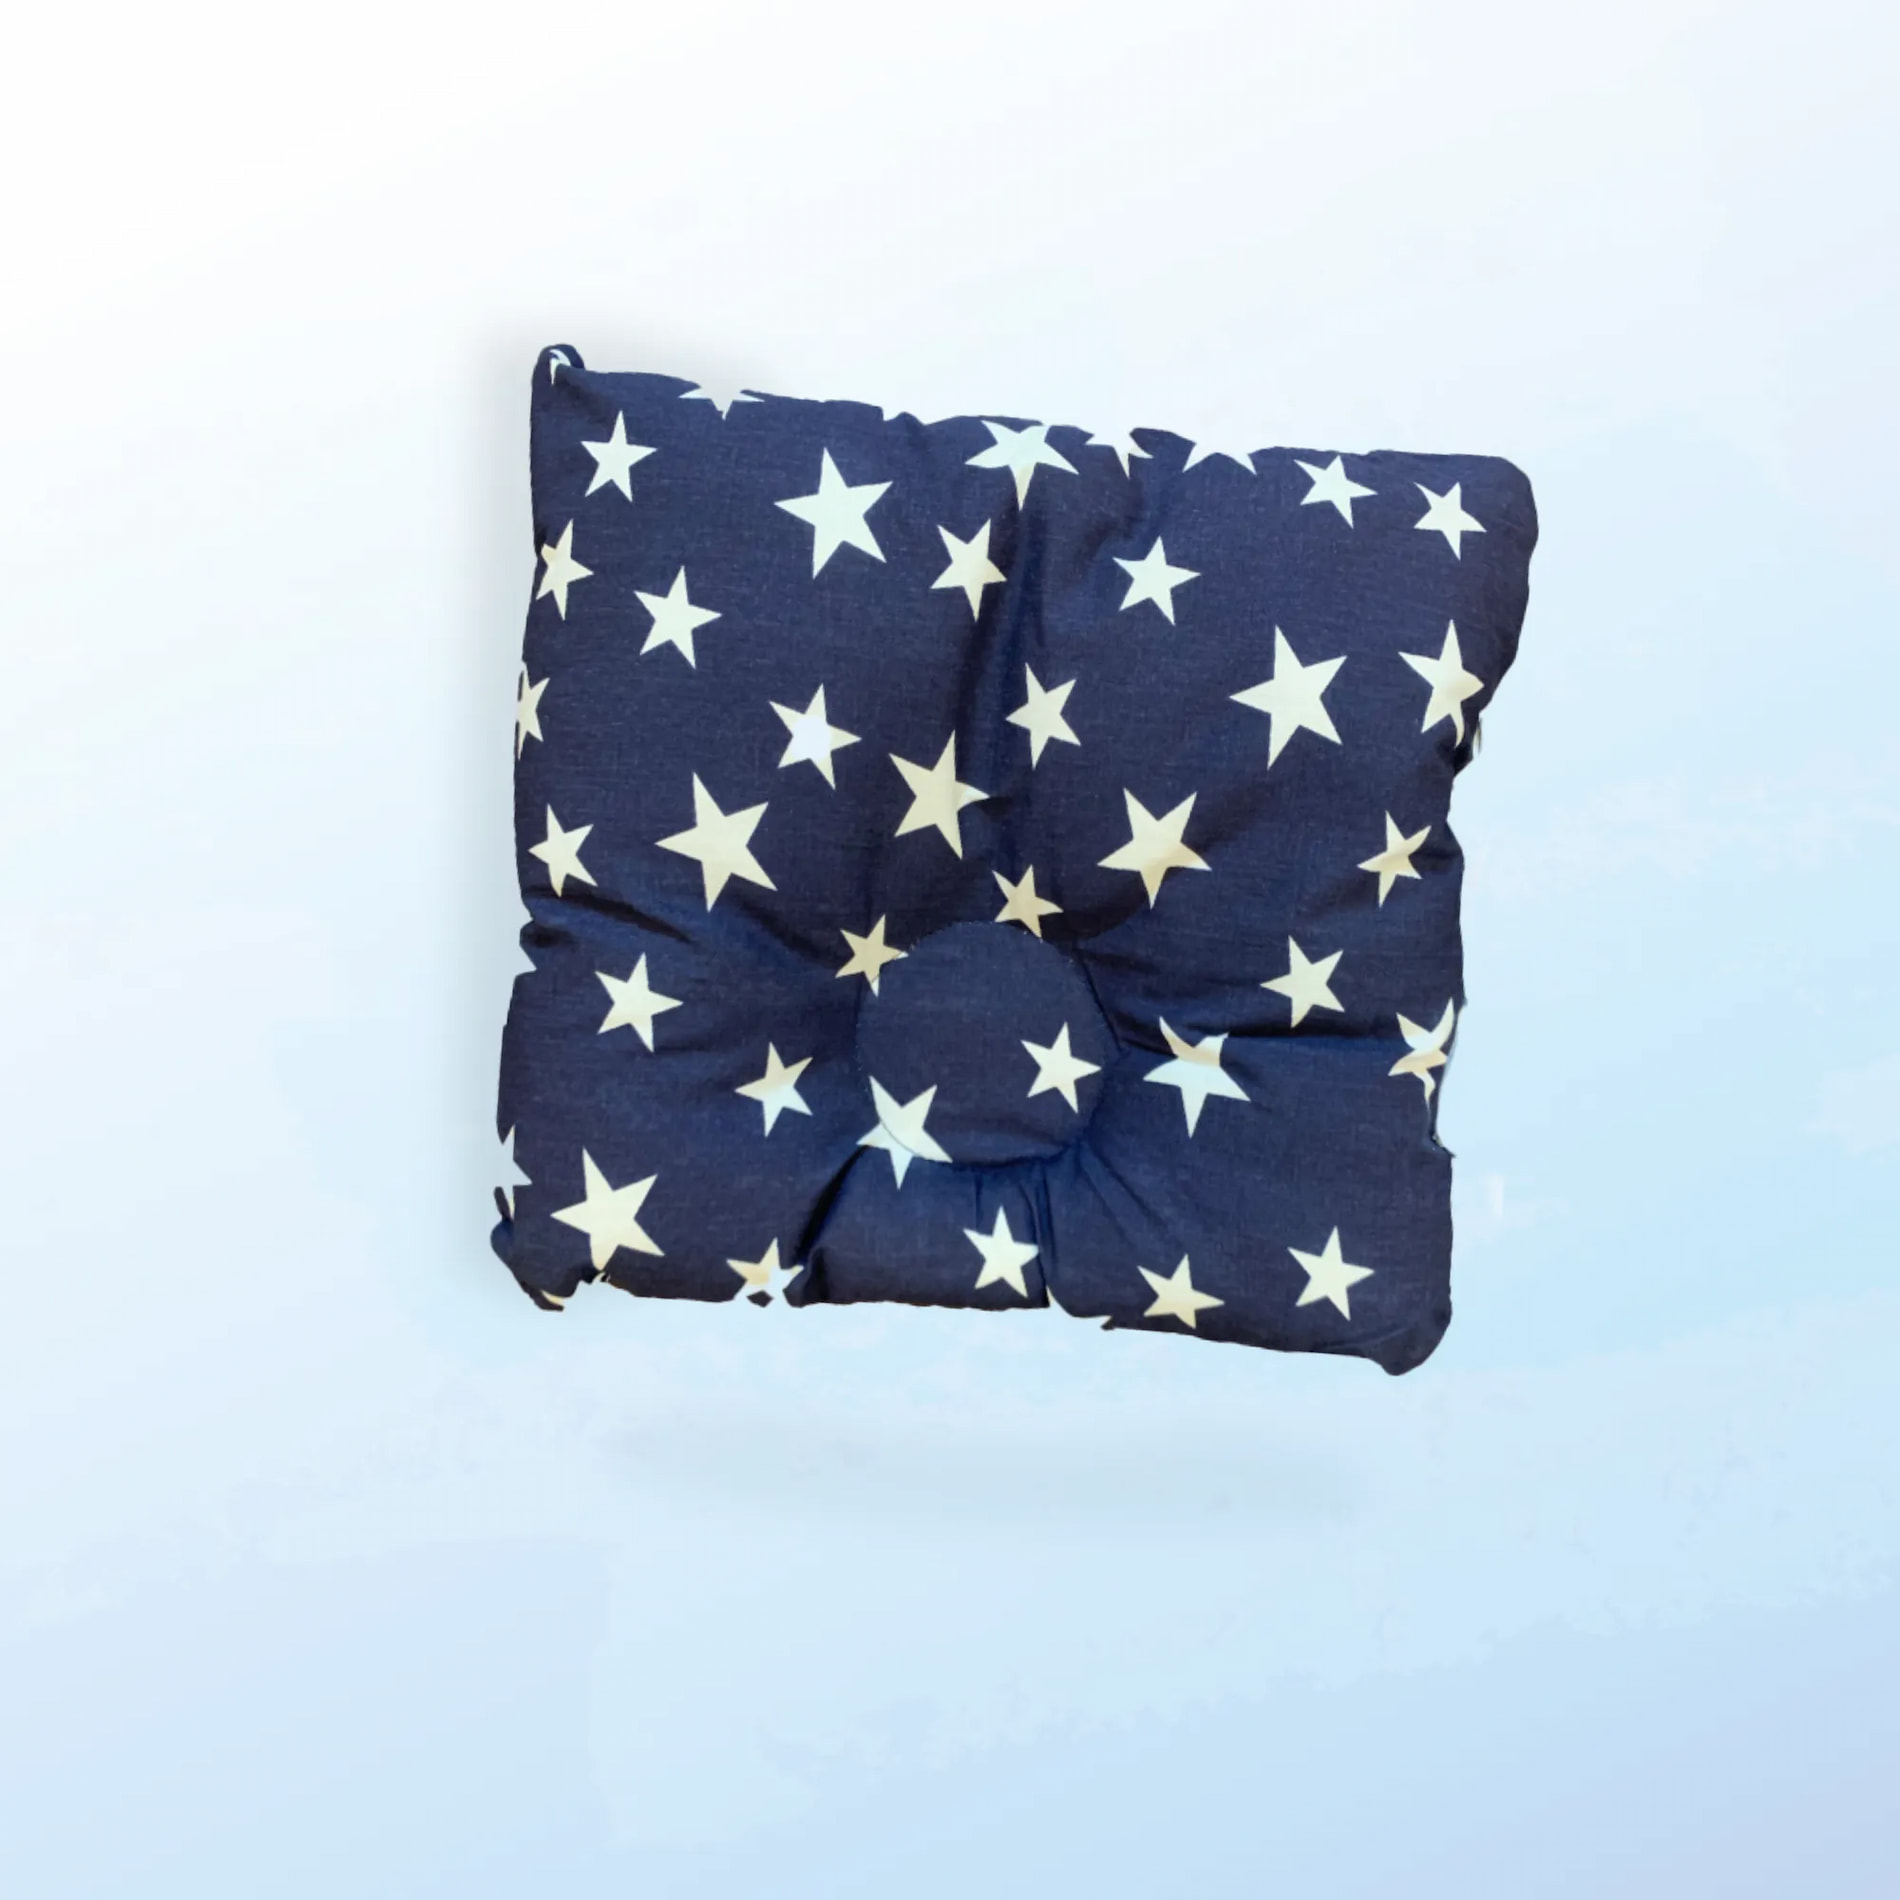 Premium Head Shaping Pillow 0-36 Months - Starry Night